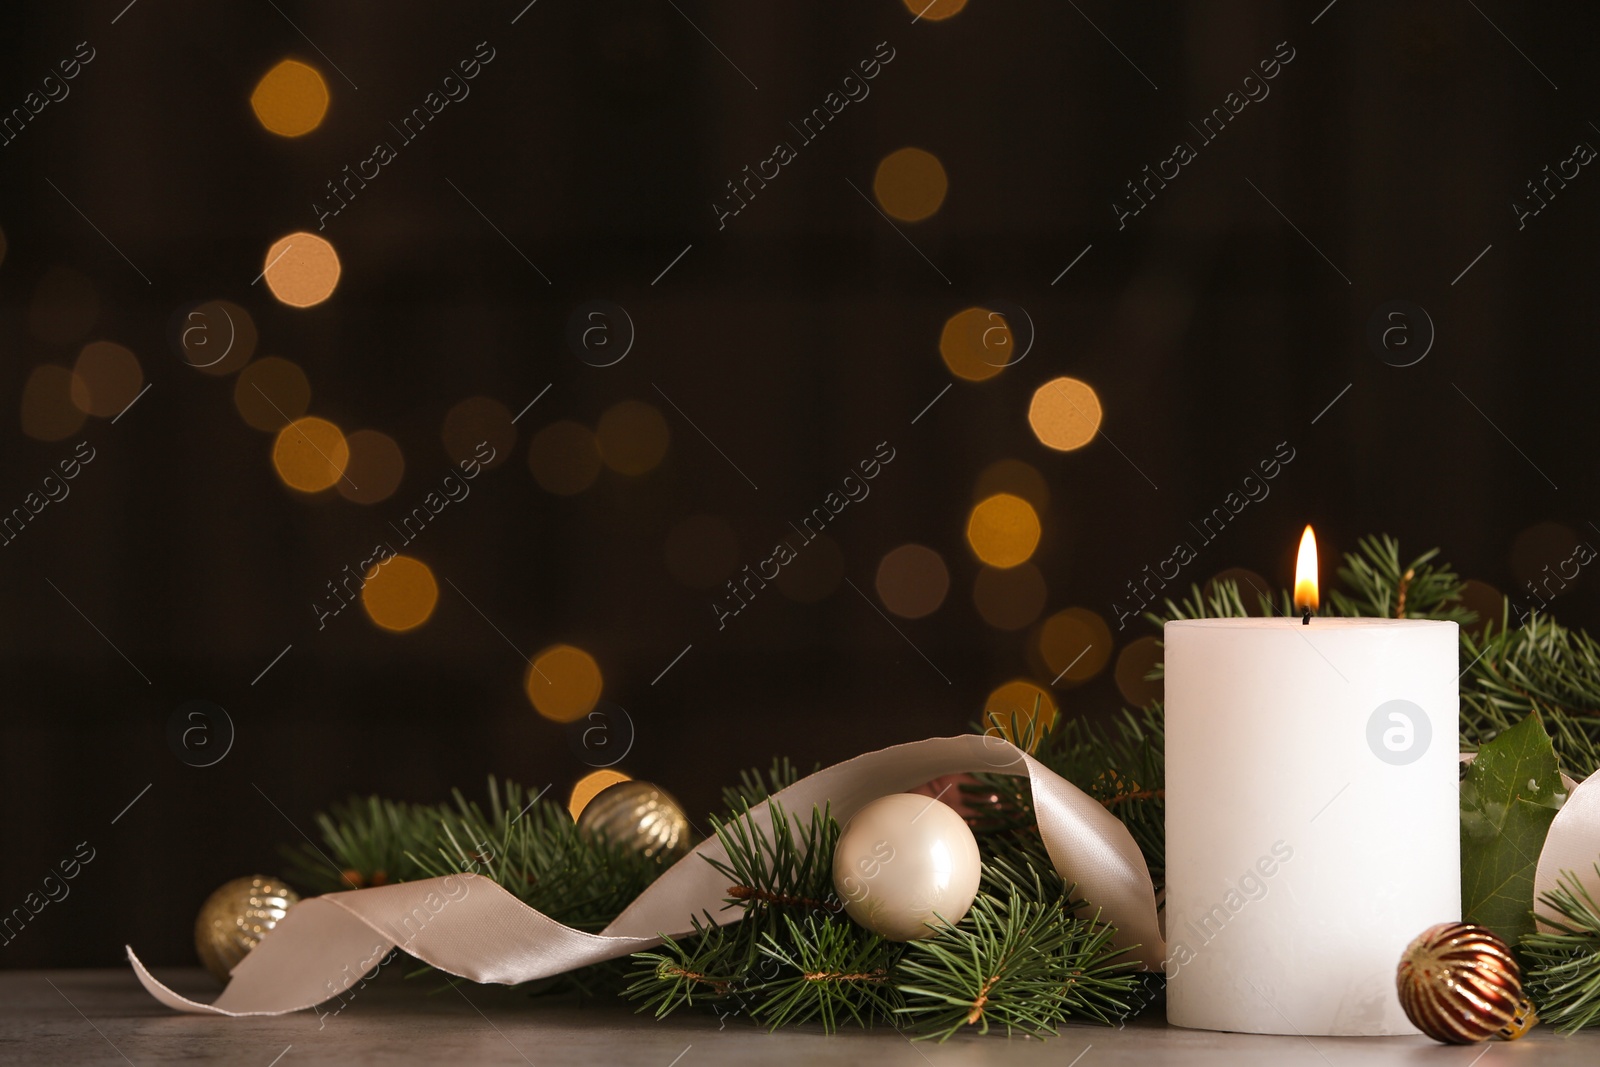 Photo of Burning white candle with Christmas decor on table against blurred lights. Space for text